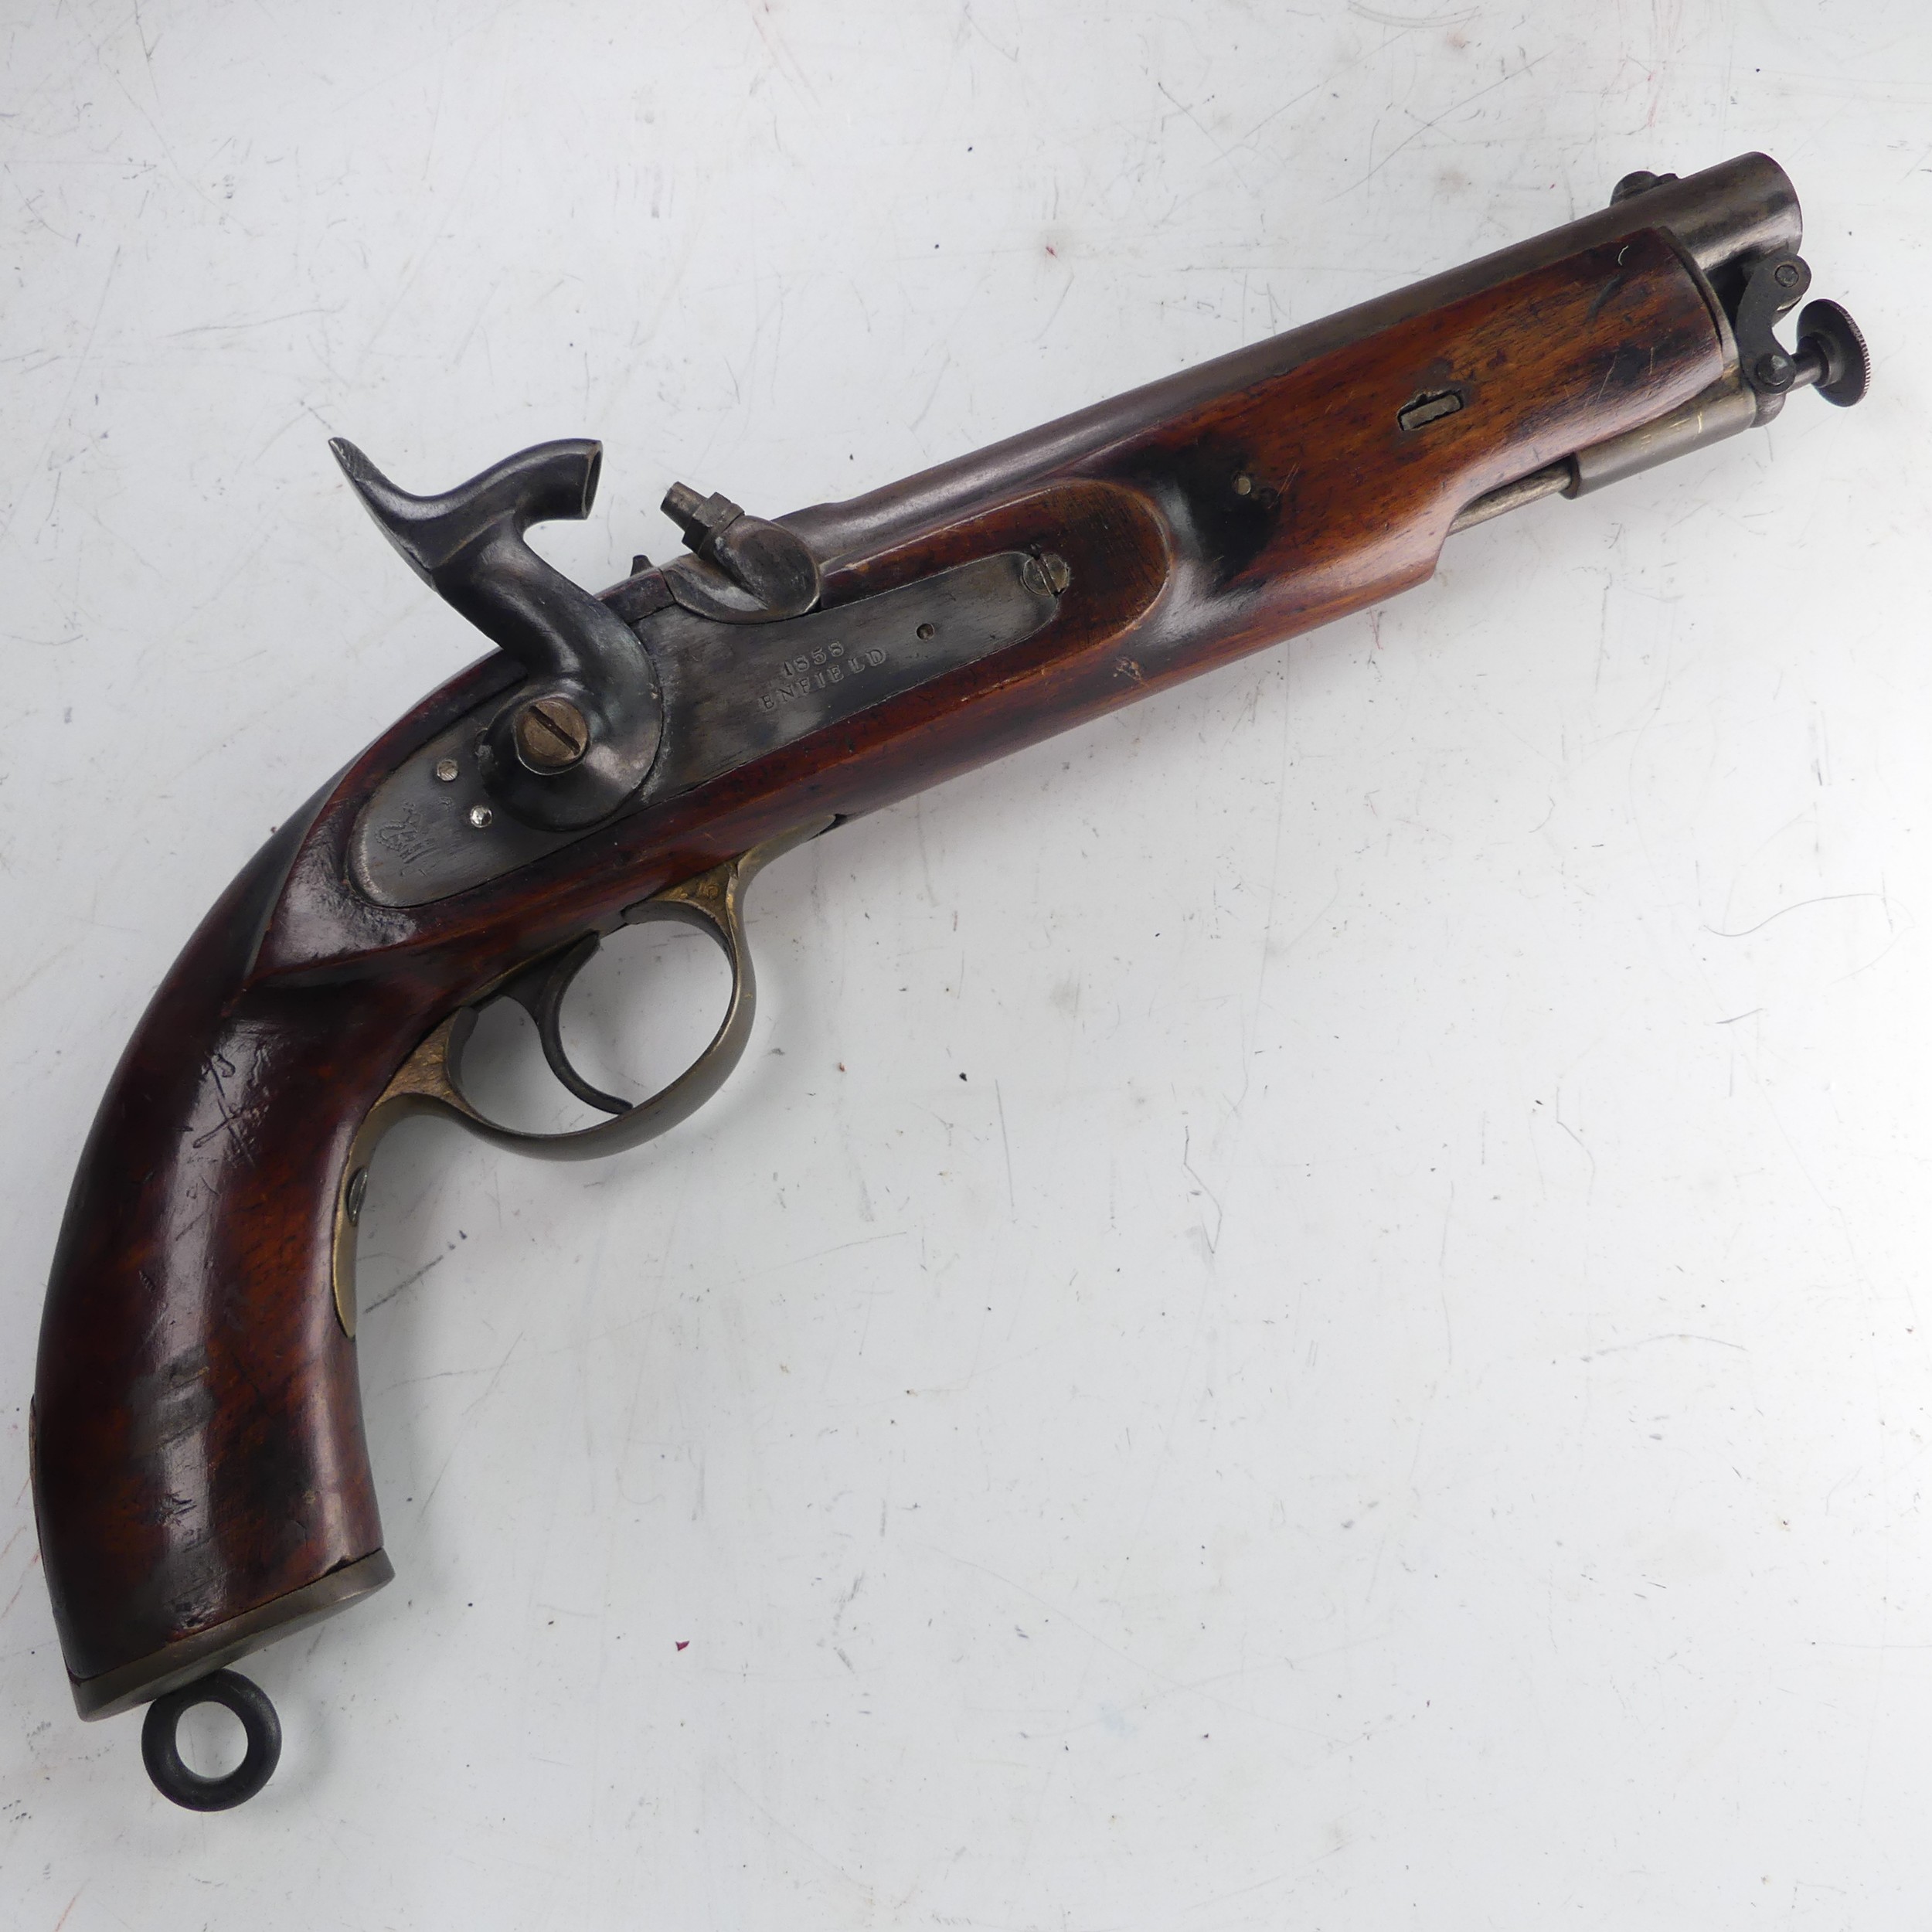 A 19th century 'Enfield' percussion cap service Pistol, with walnut stock, 8 inch steel barrel,